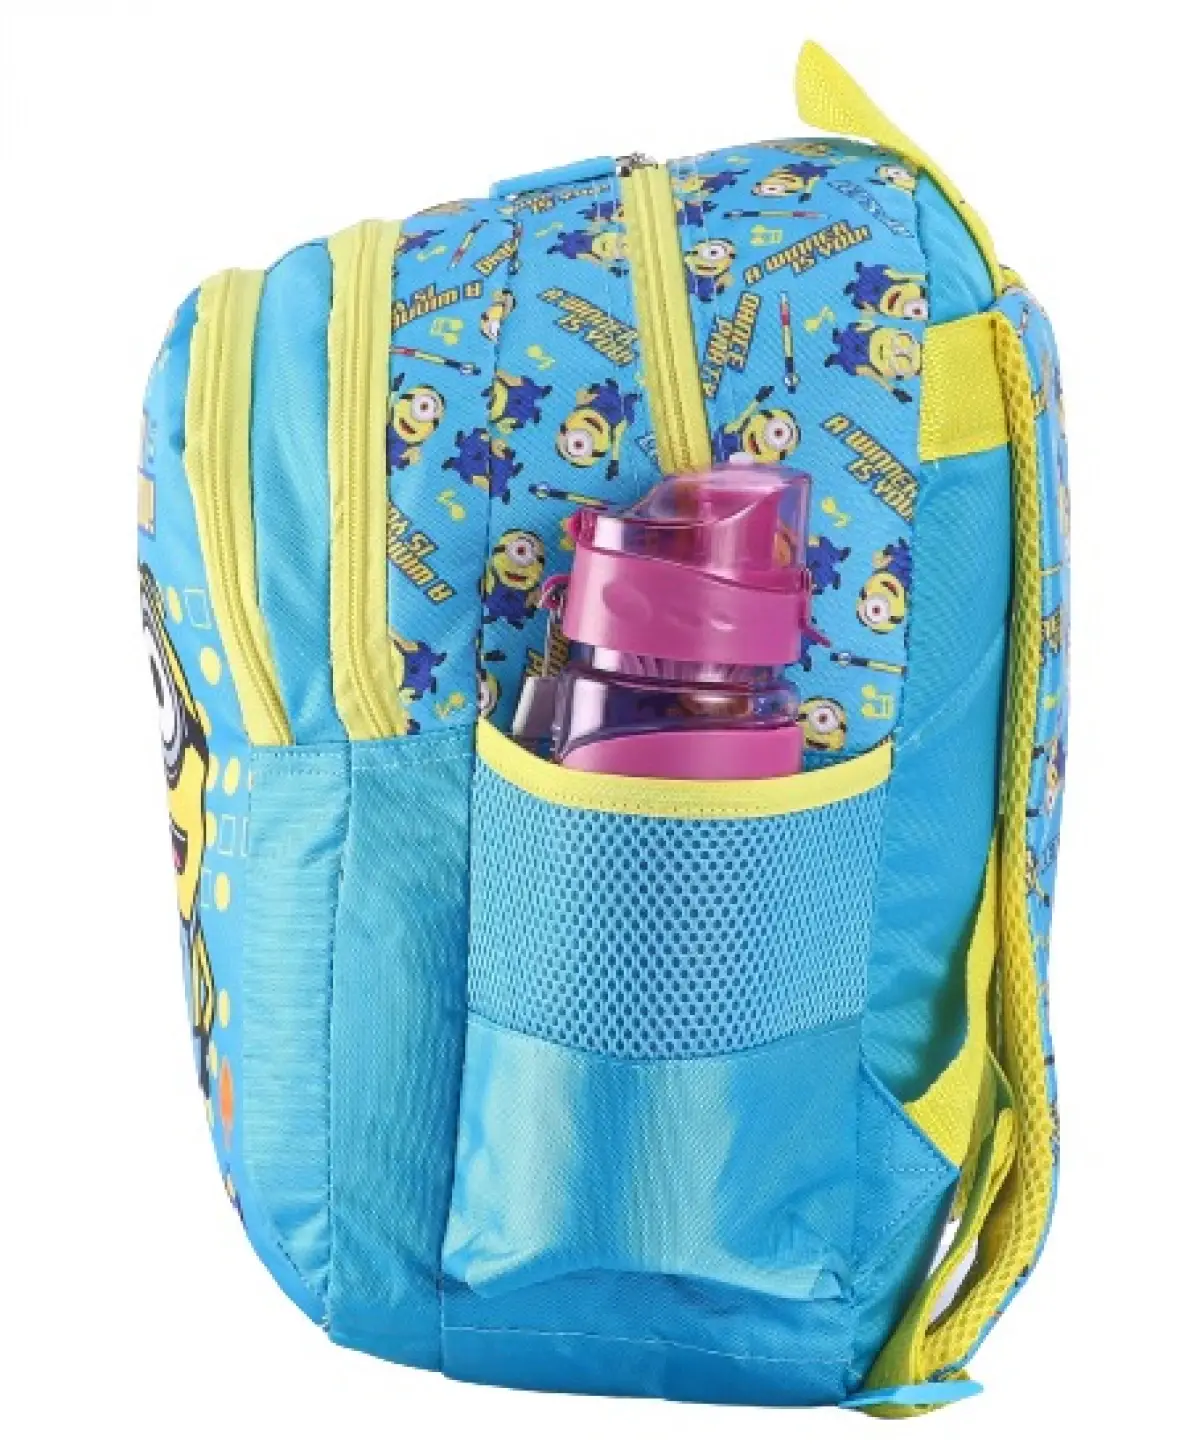 Striders 14 inches Minion Unleash Fun with Our Trendsetting School Bag Multicolour, 3Y+